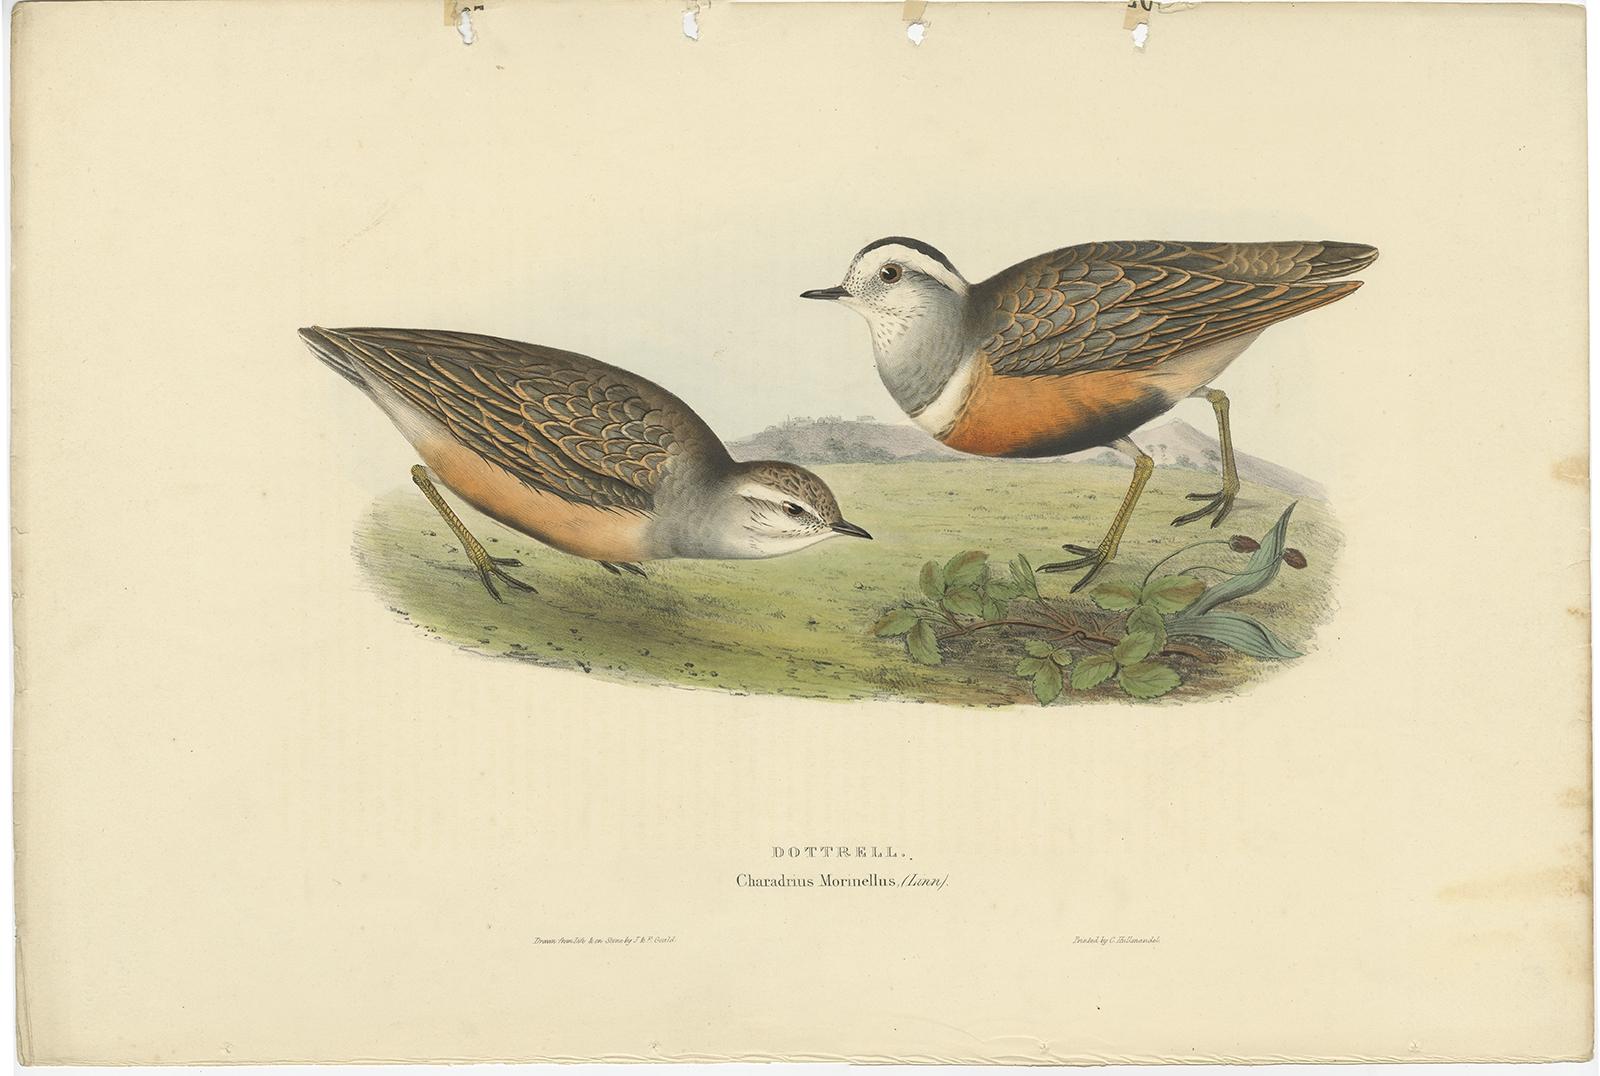 Antique bird print titled 'Dottrel'. 

Old bird print depicting the dotterel bird. This print originates from 'Birds of Europe' by J. Gould (1832-1837).

Artists and Engravers: John Gould (1804 - 1881) was an English ornithologist and bird